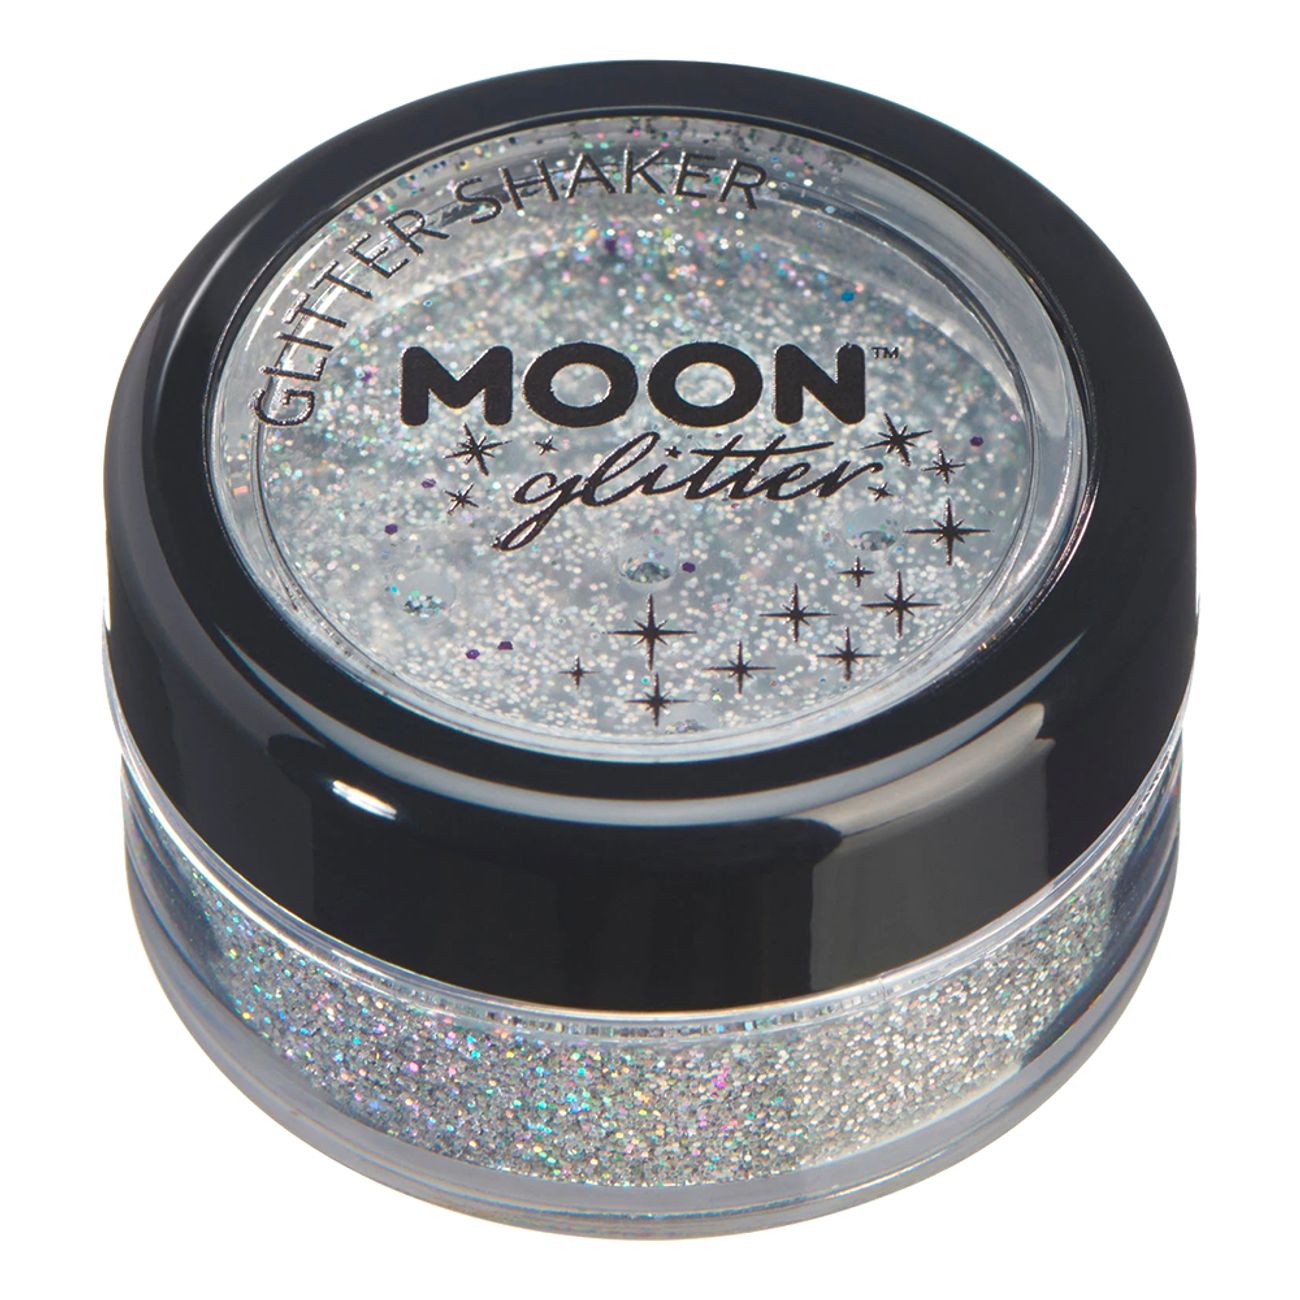 moon-creations-glitter-holographic-glitter-shakers-79749-4